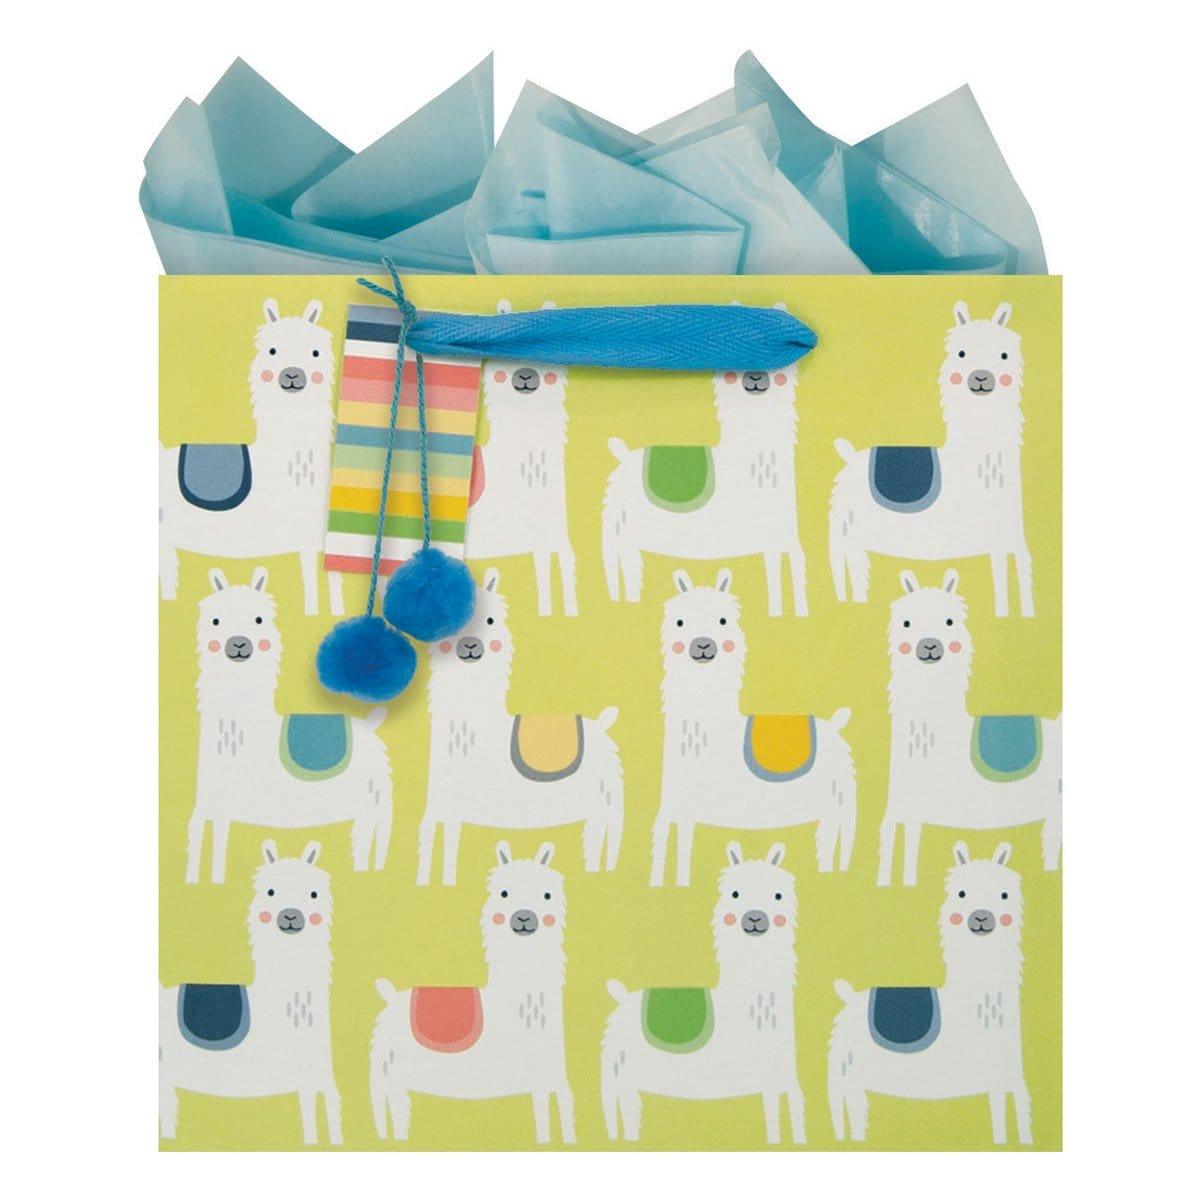 Buy Gift Wrap & Bags Gift Bag Medium 9.75 In. - Little Llamas sold at Party Expert